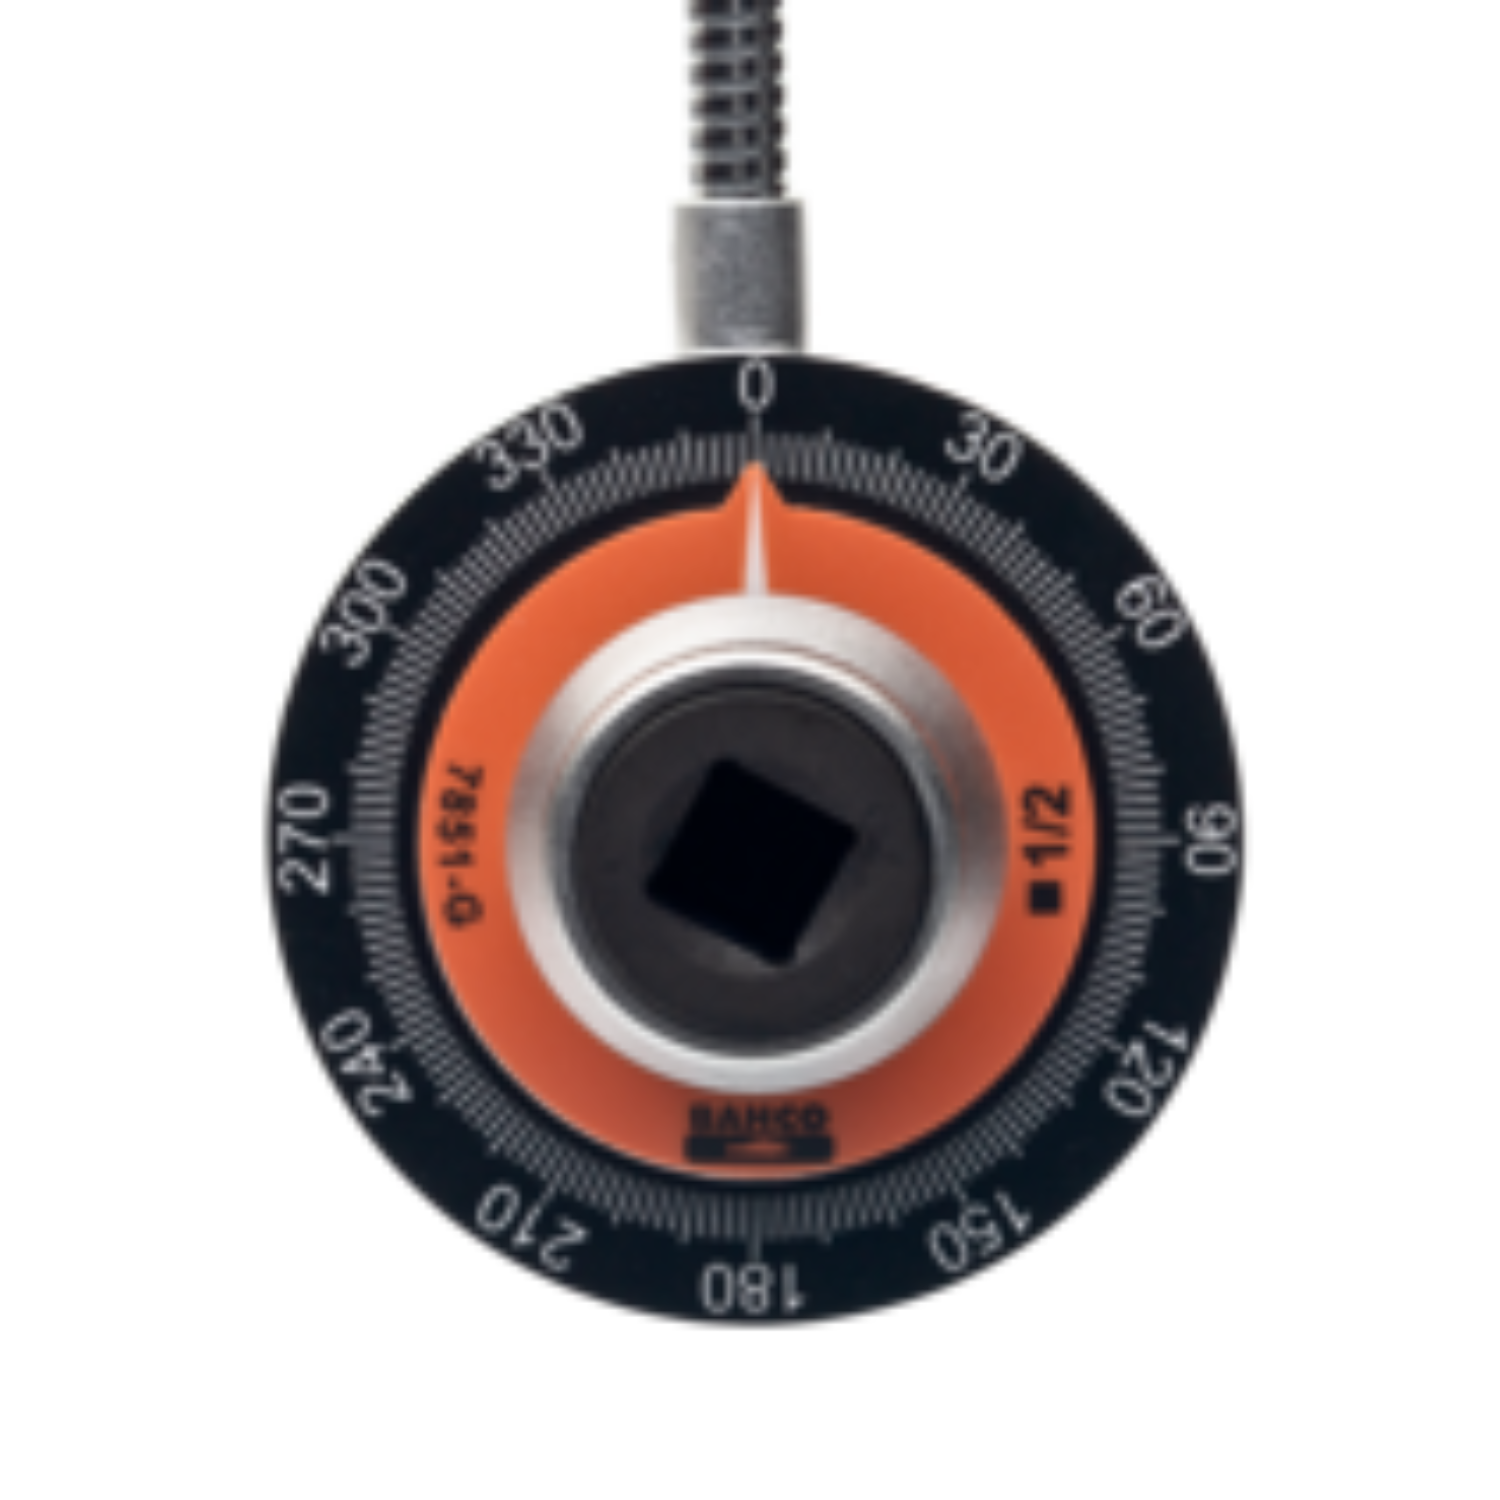 BAHCO 7851 M 8951 M Angle Meter with Magnet (BAHCO Tools) - Premium Angle Meter from BAHCO - Shop now at Yew Aik.